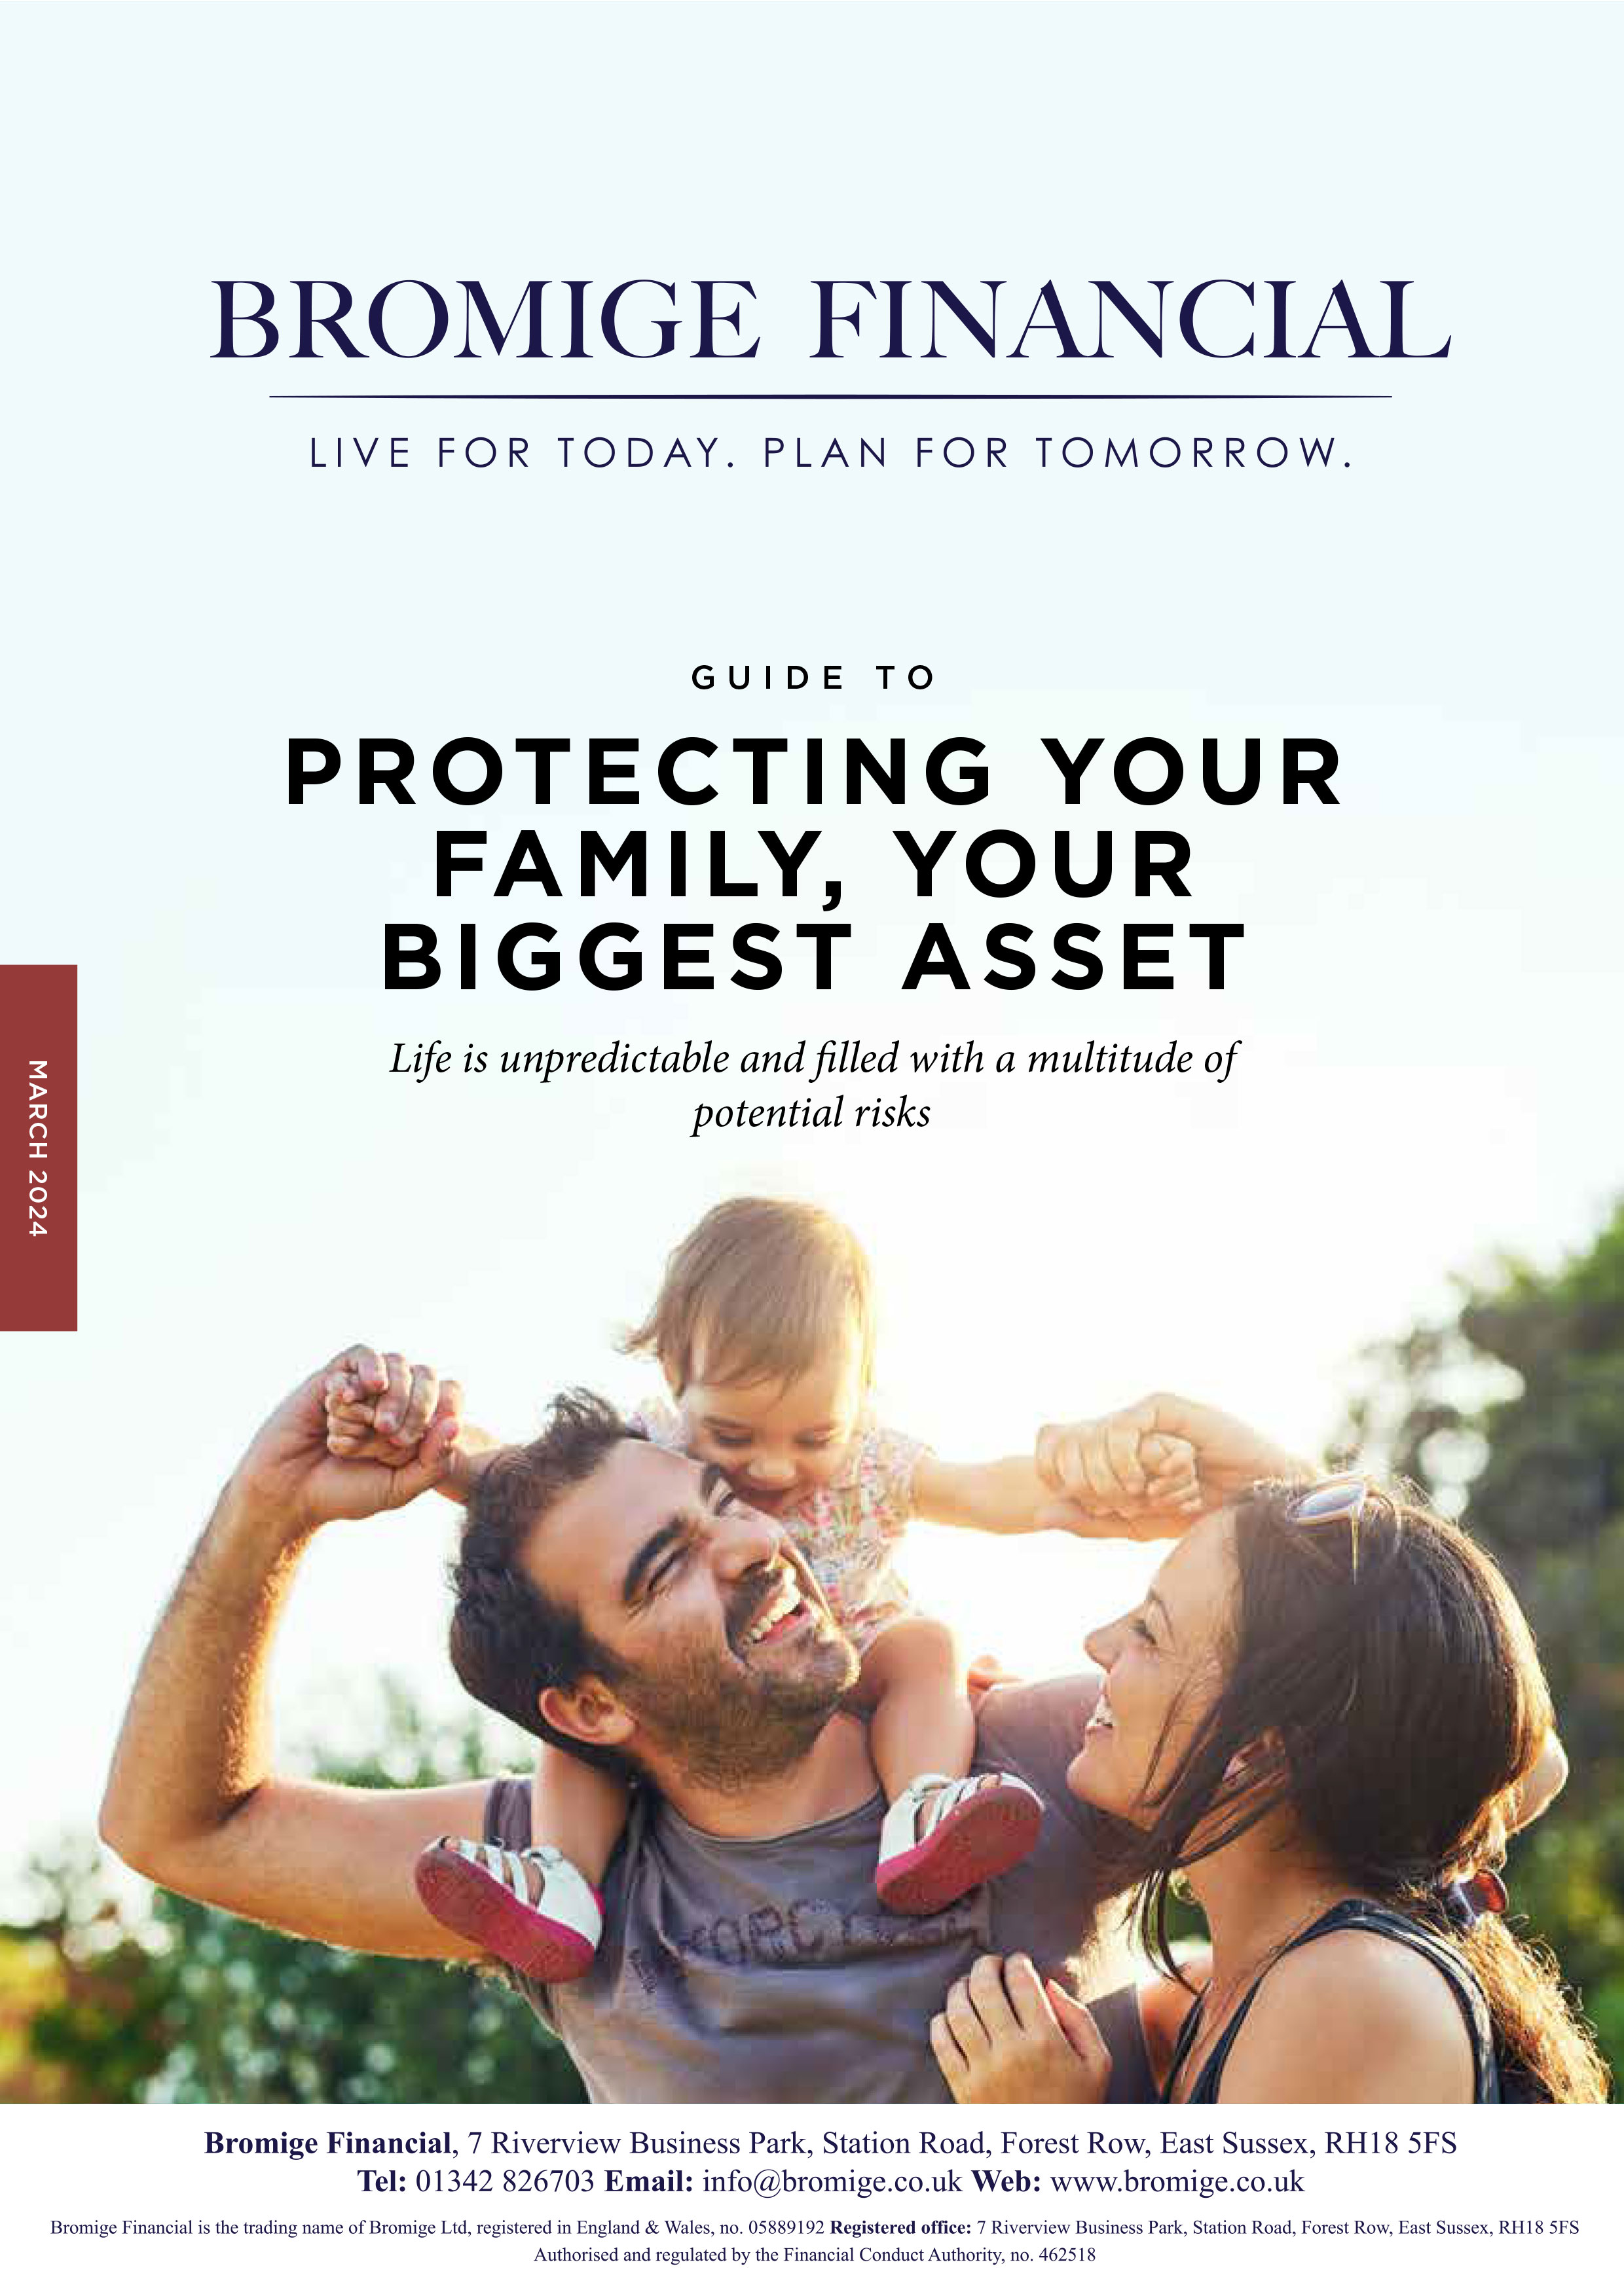 Protecting your family